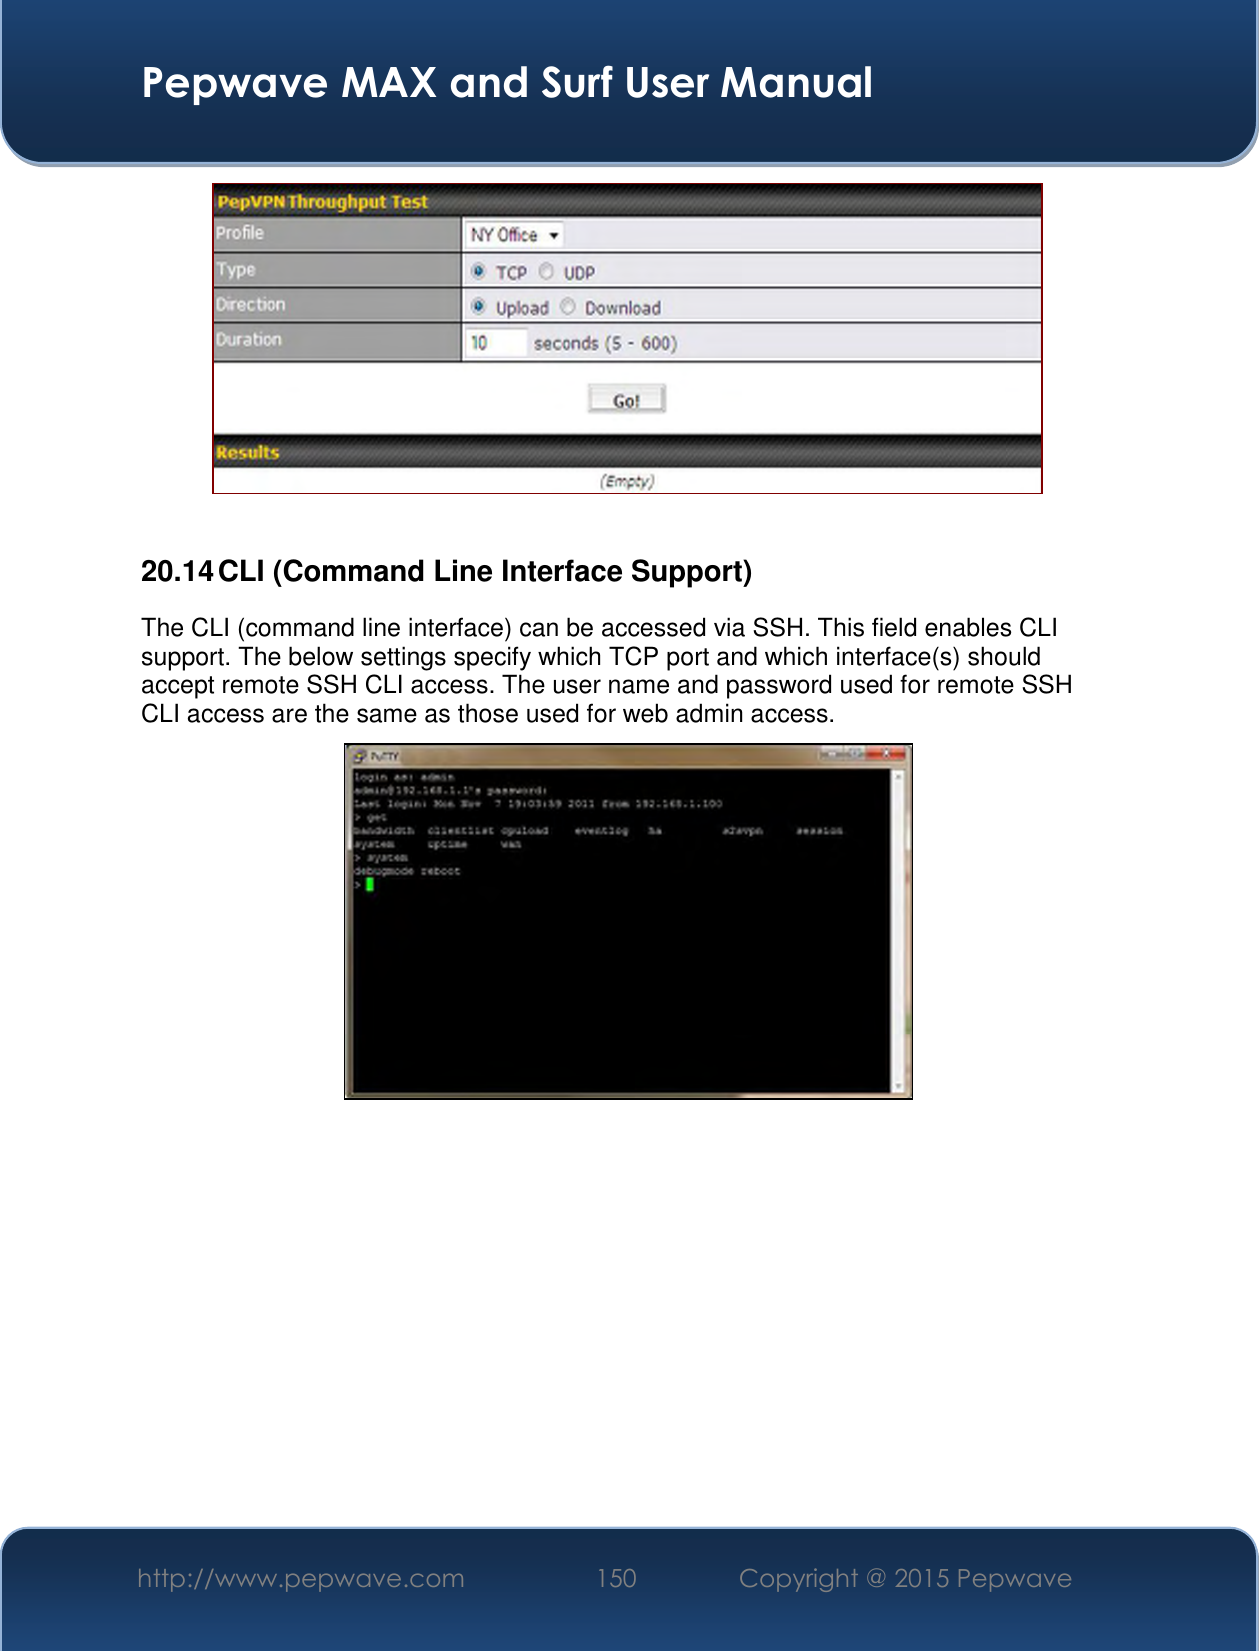  Pepwave MAX and Surf User Manual http://www.pepwave.com 150   Copyright @ 2015 Pepwave     20.14 CLI (Command Line Interface Support) The CLI (command line interface) can be accessed via SSH. This field enables CLI support. The below settings specify which TCP port and which interface(s) should accept remote SSH CLI access. The user name and password used for remote SSH CLI access are the same as those used for web admin access.    